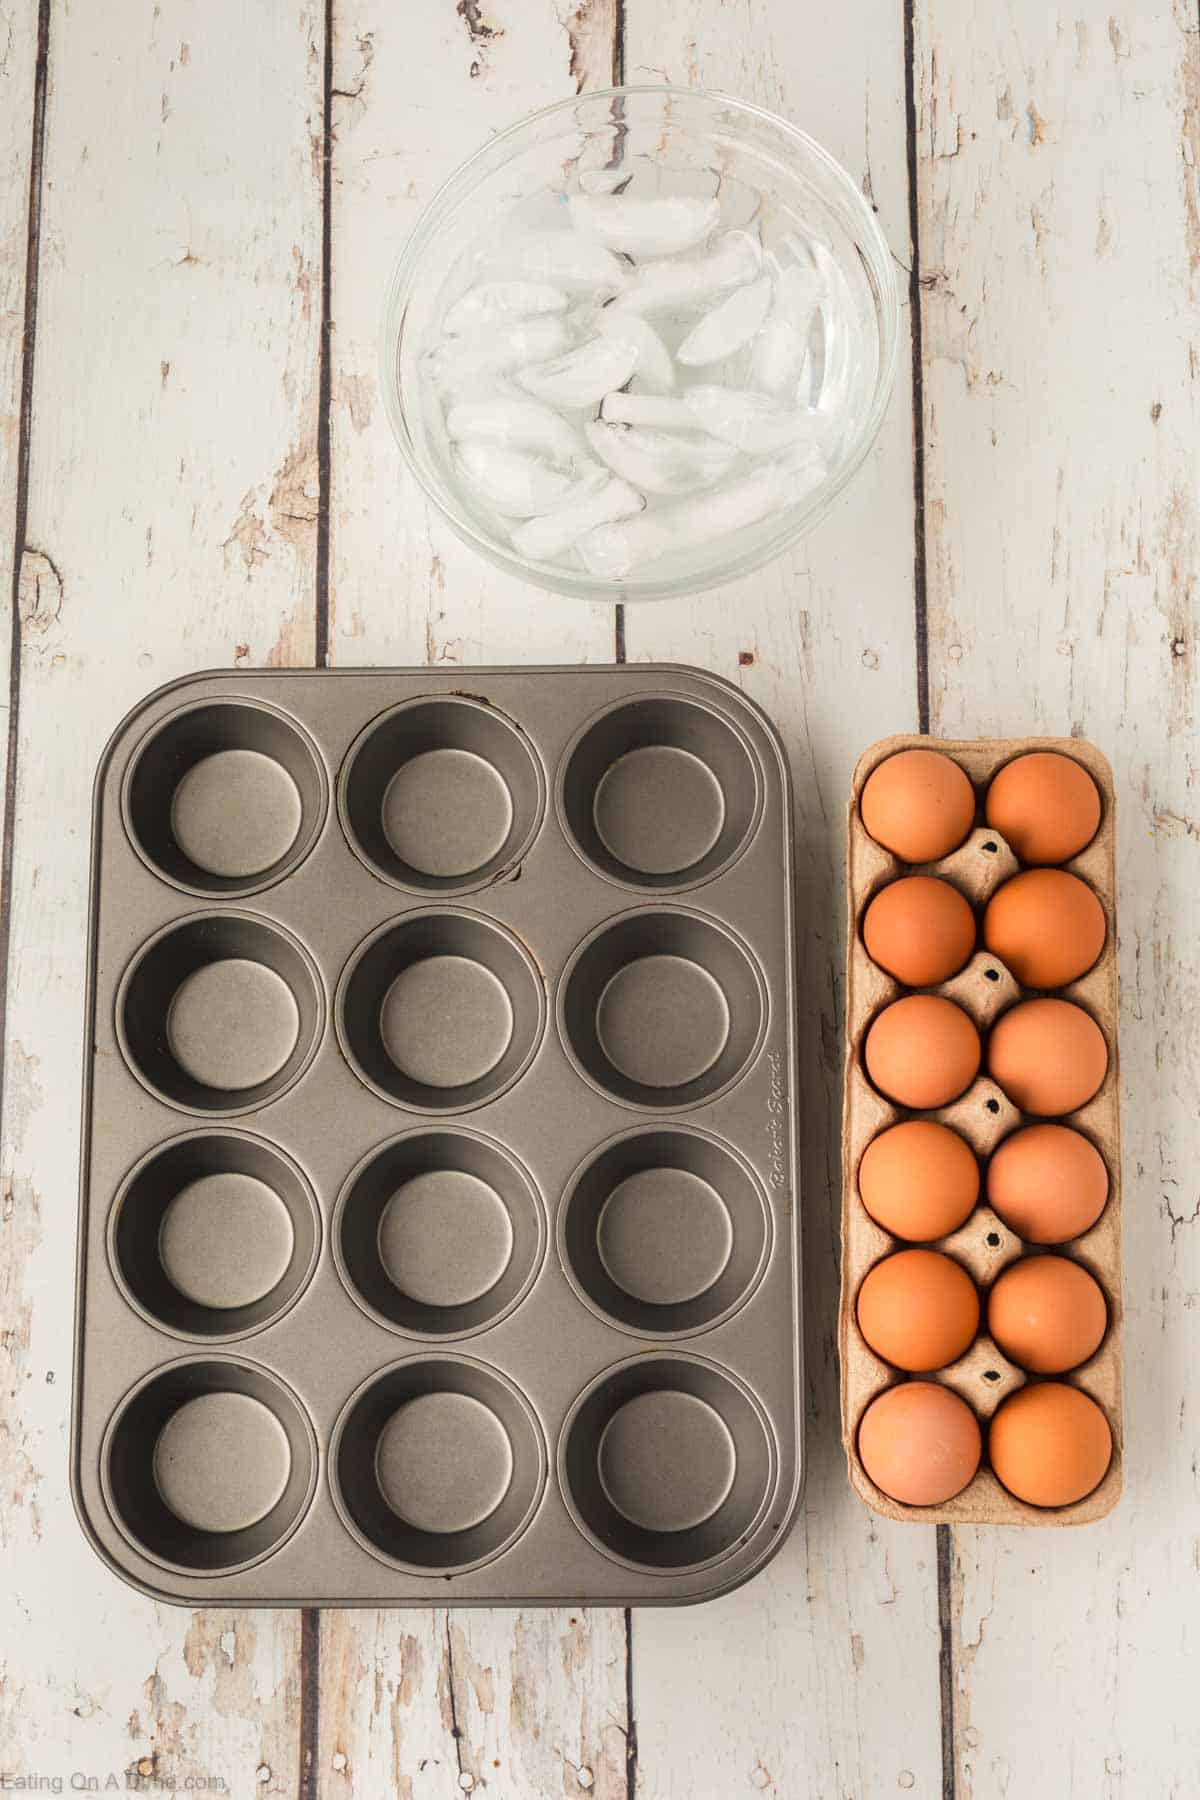 Hard Boiled Eggs in the Oven Ingredients - eggs, oven, ice water